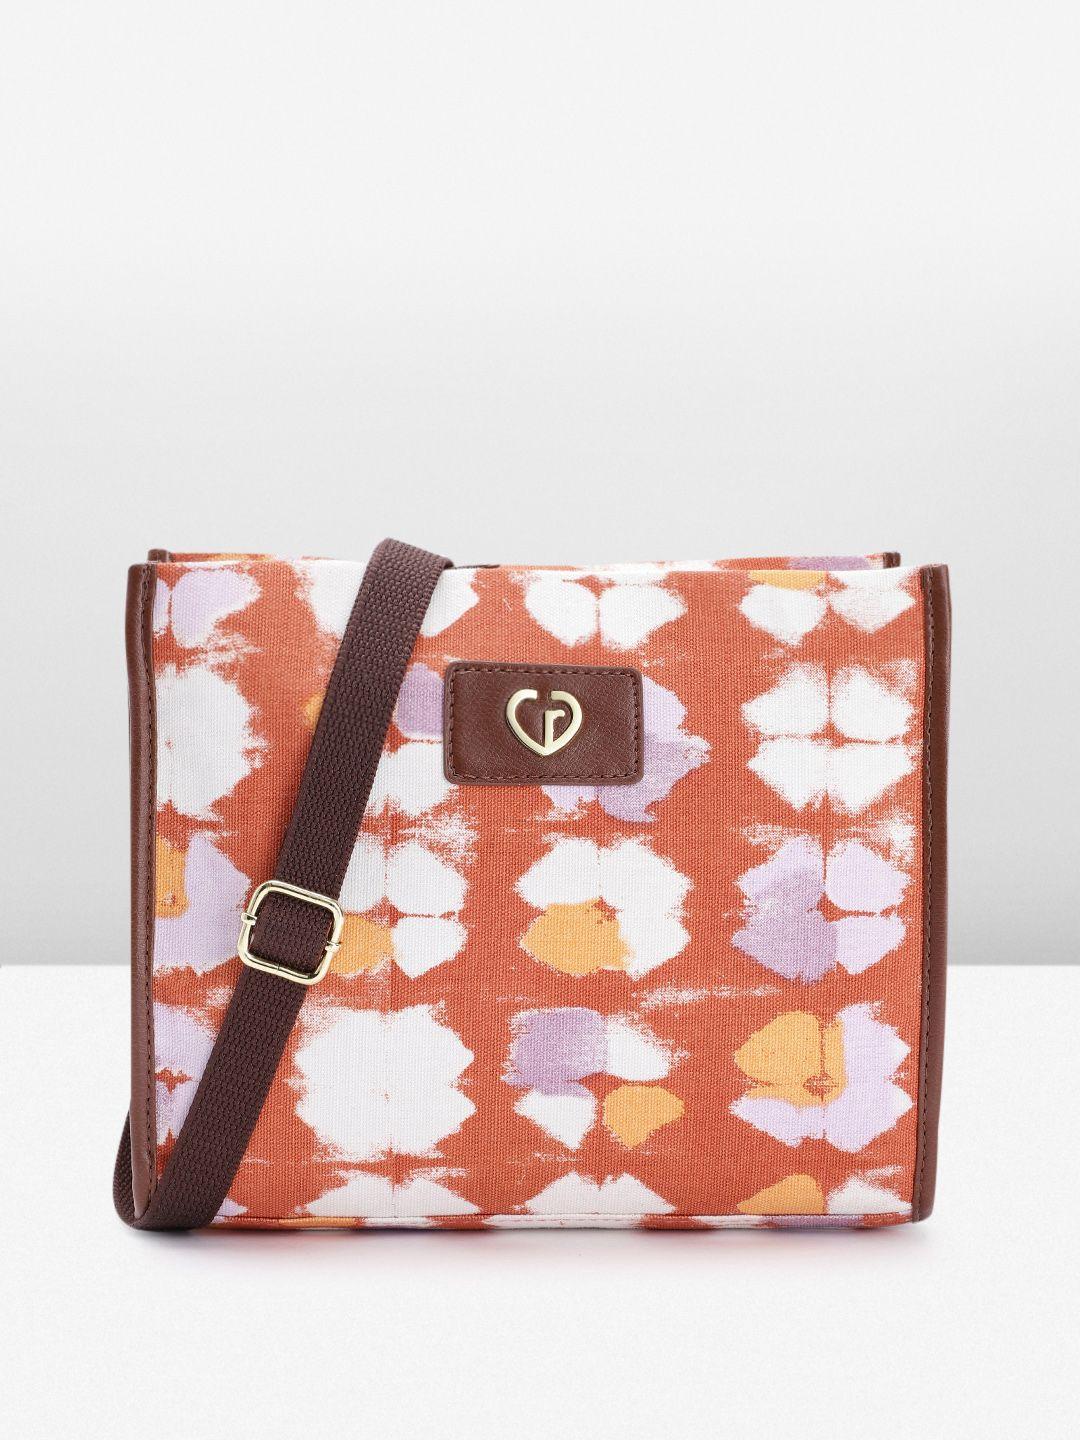 caprese abstract printed structured sling bag